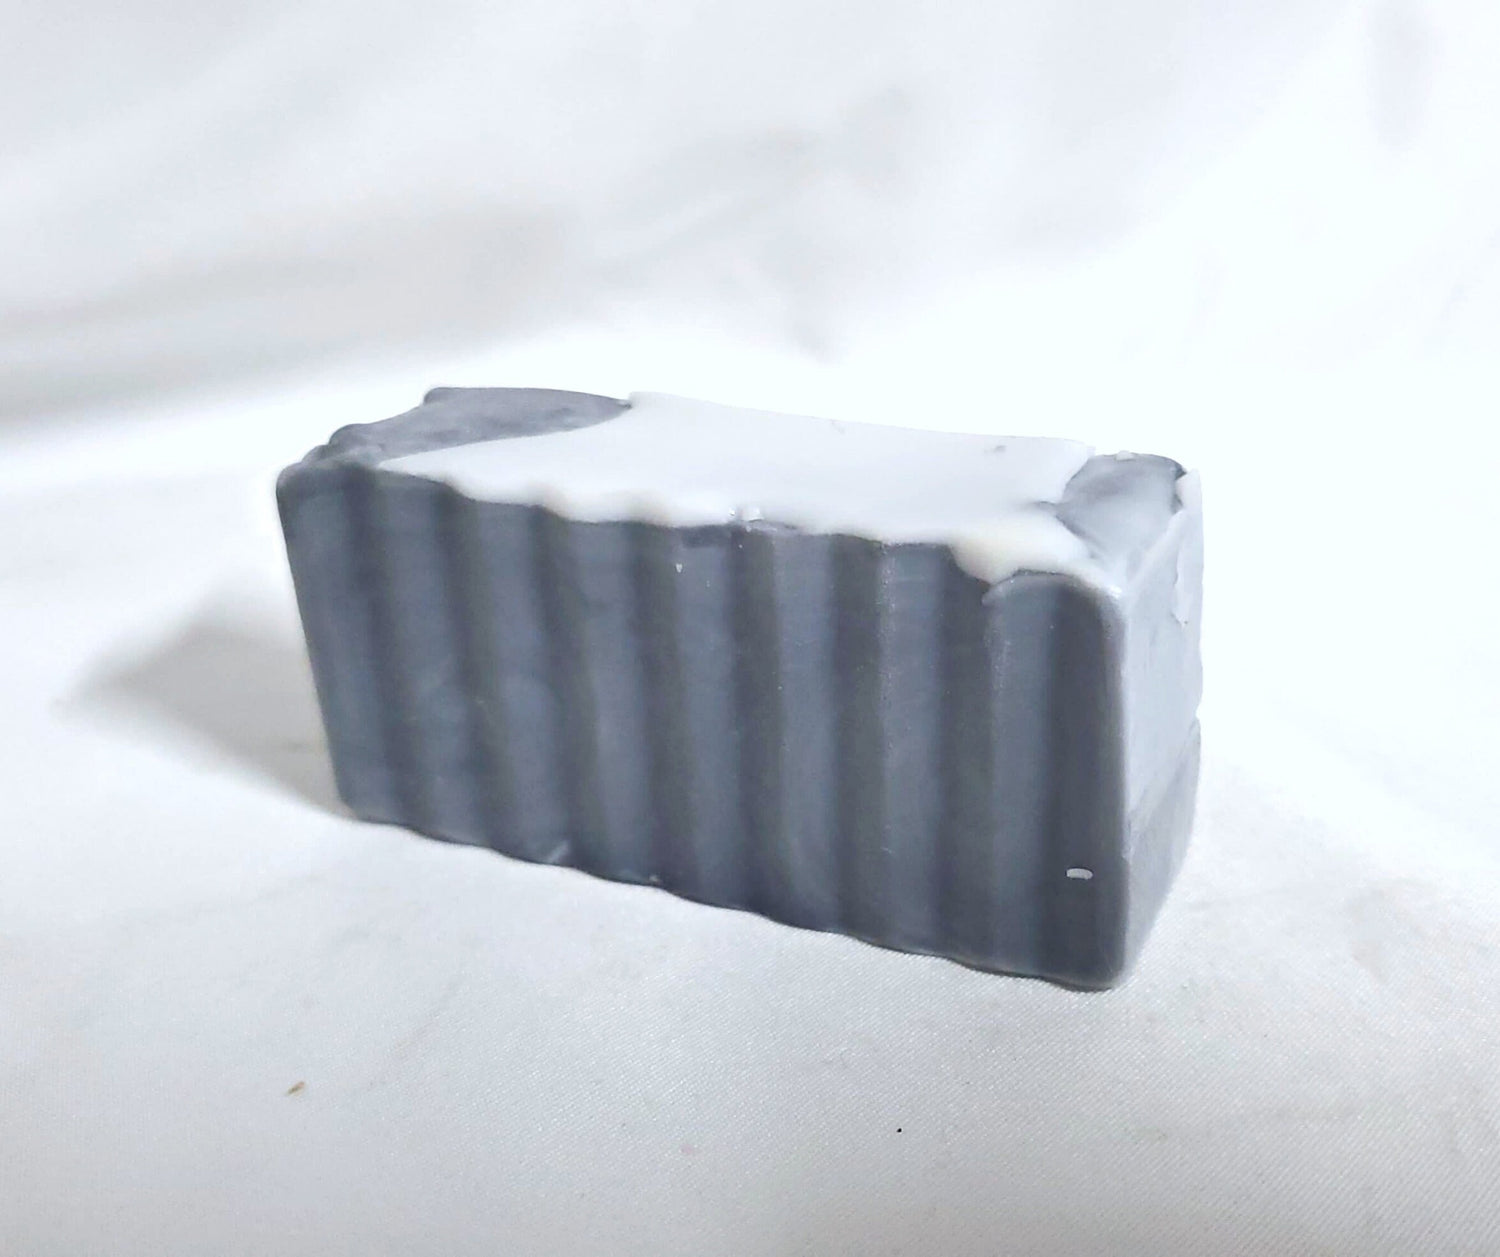 Handmade Noir Soap, Scented like a 1940s gritty crime drama Lord and Lady Towers